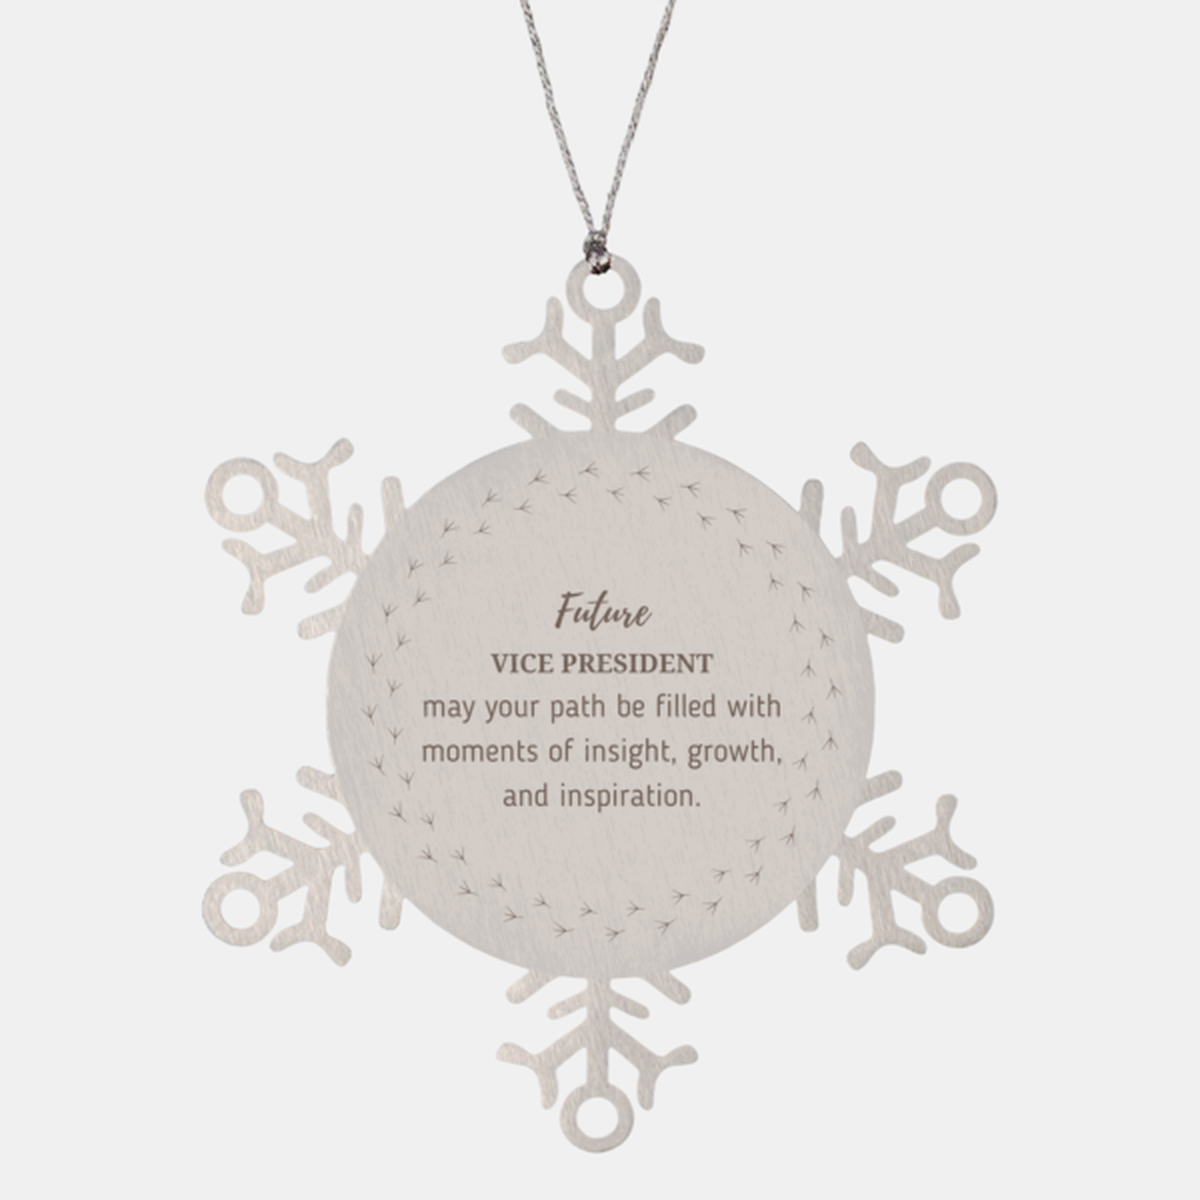 Future Vice President Gifts, May your path be filled with moments of insight, Graduation Gifts for New Vice President, Christmas Unique Snowflake Ornament For Men, Women, Friends